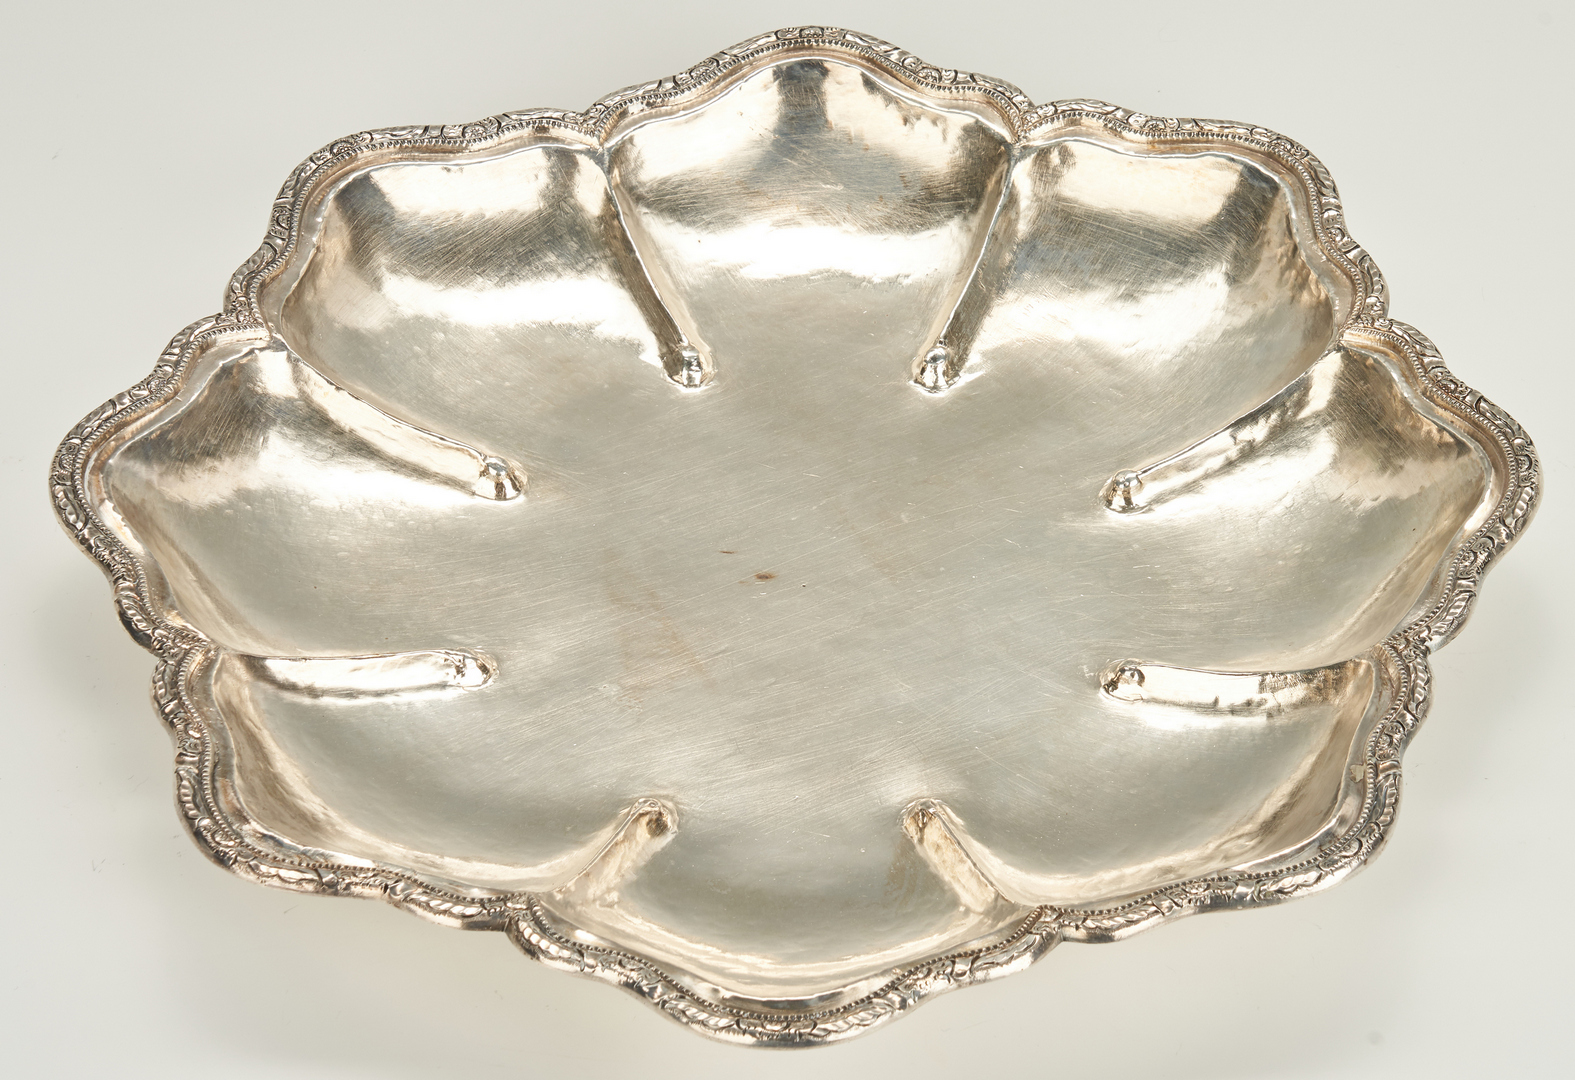 Lot 959: Large Silver bowl marked Plata 900